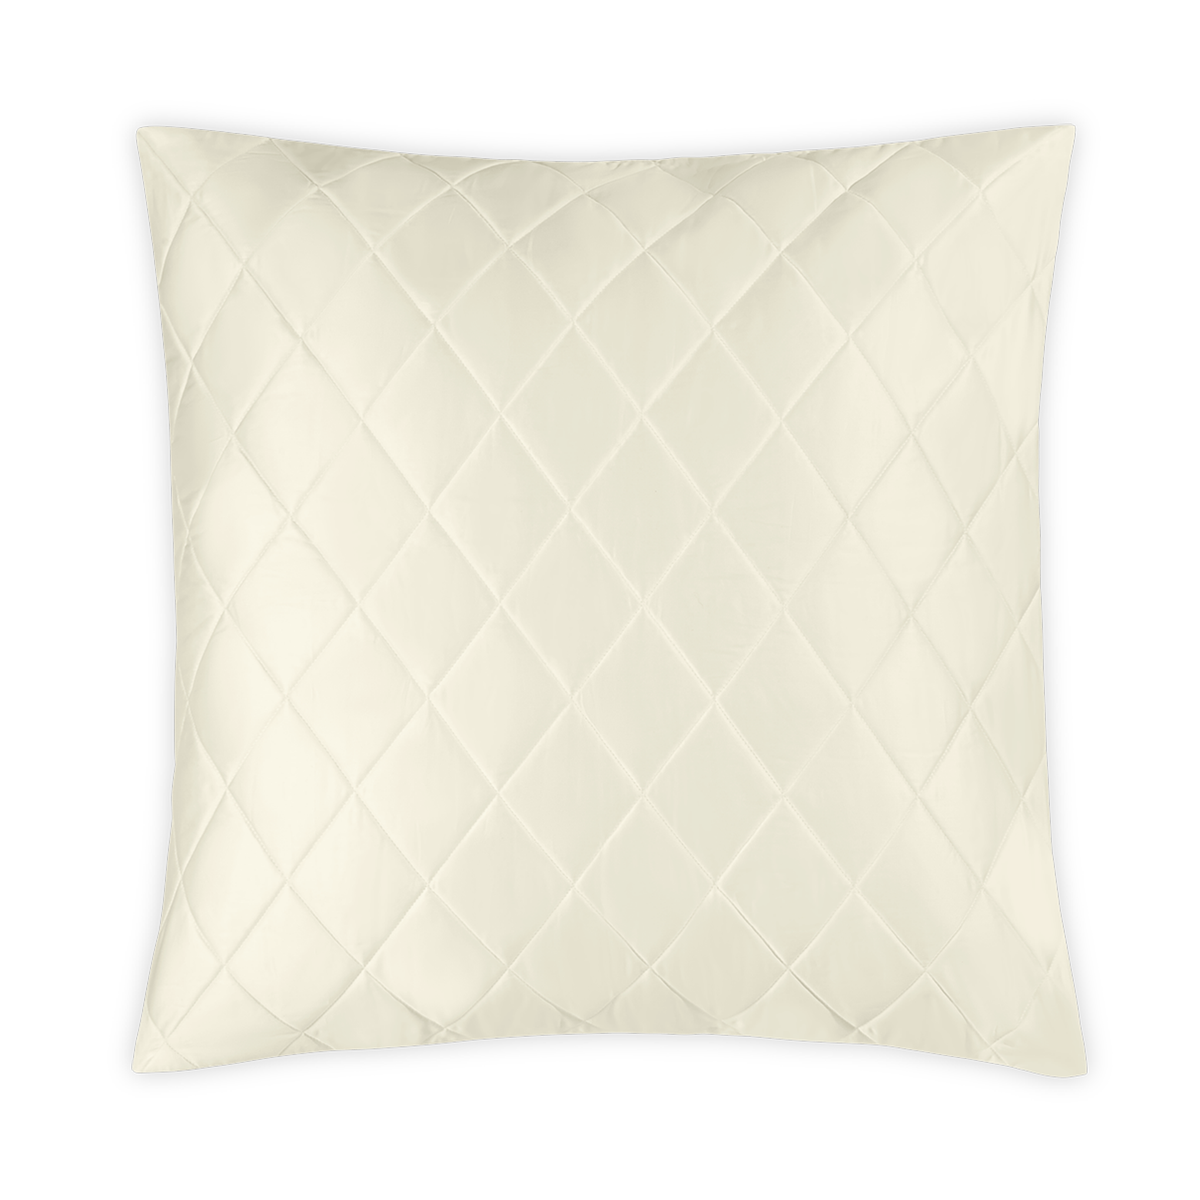 Silo Image of Matouk Nocturne Quilted Bedding Euro Sham in Ivory